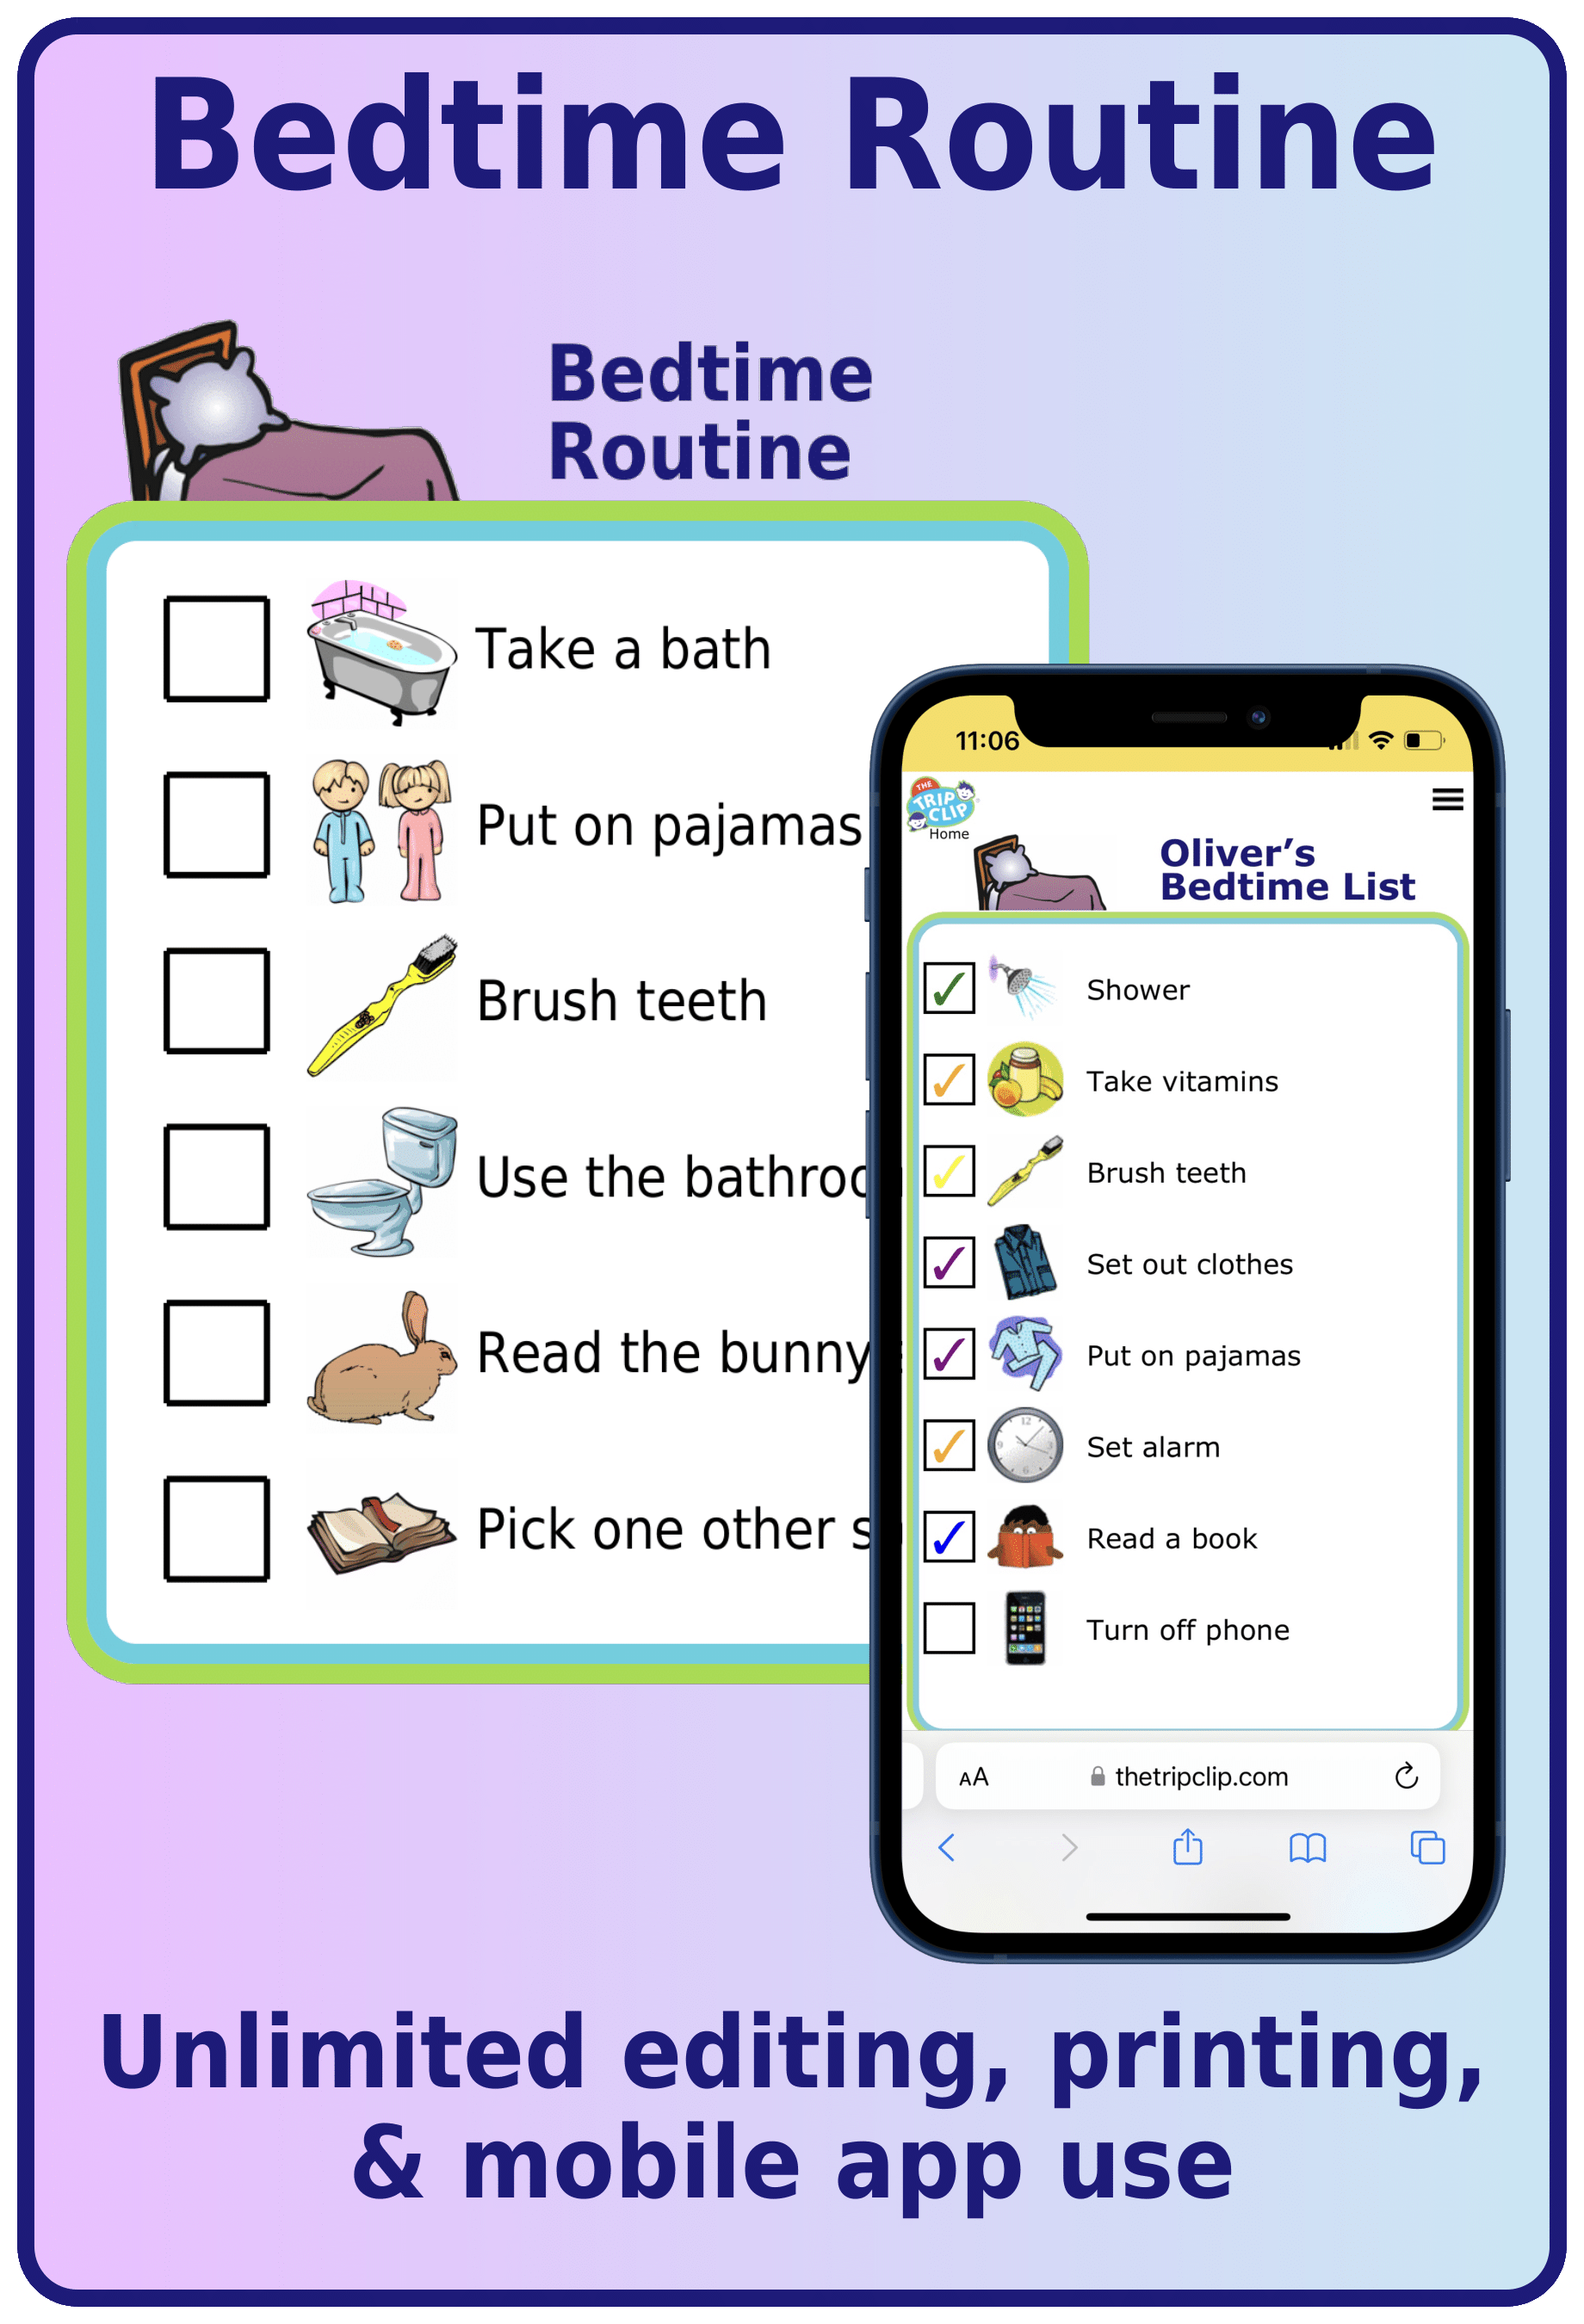 Picture checklist of bedtime routine for kids